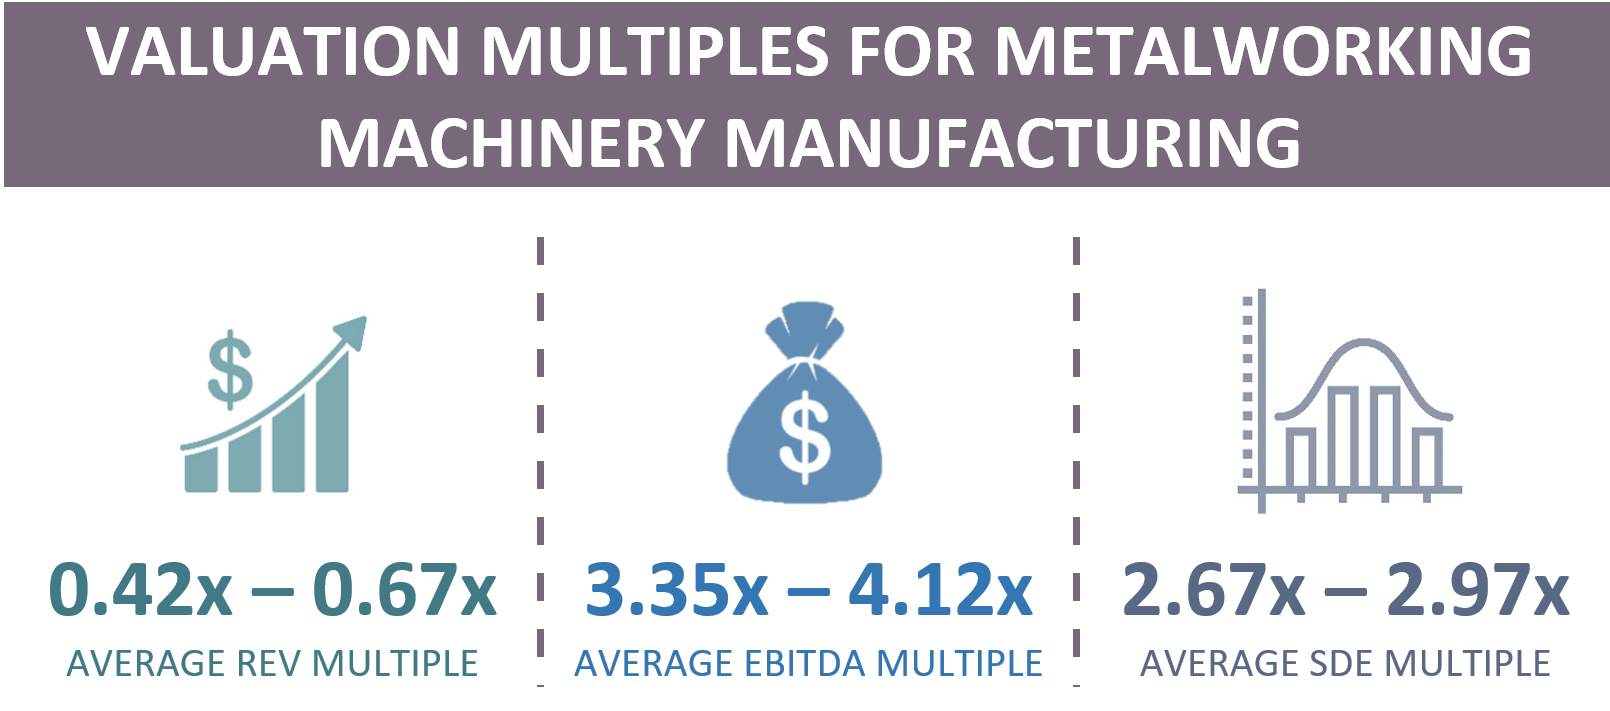 Valuation Multiples For Metalworking Machinery Manufacturing